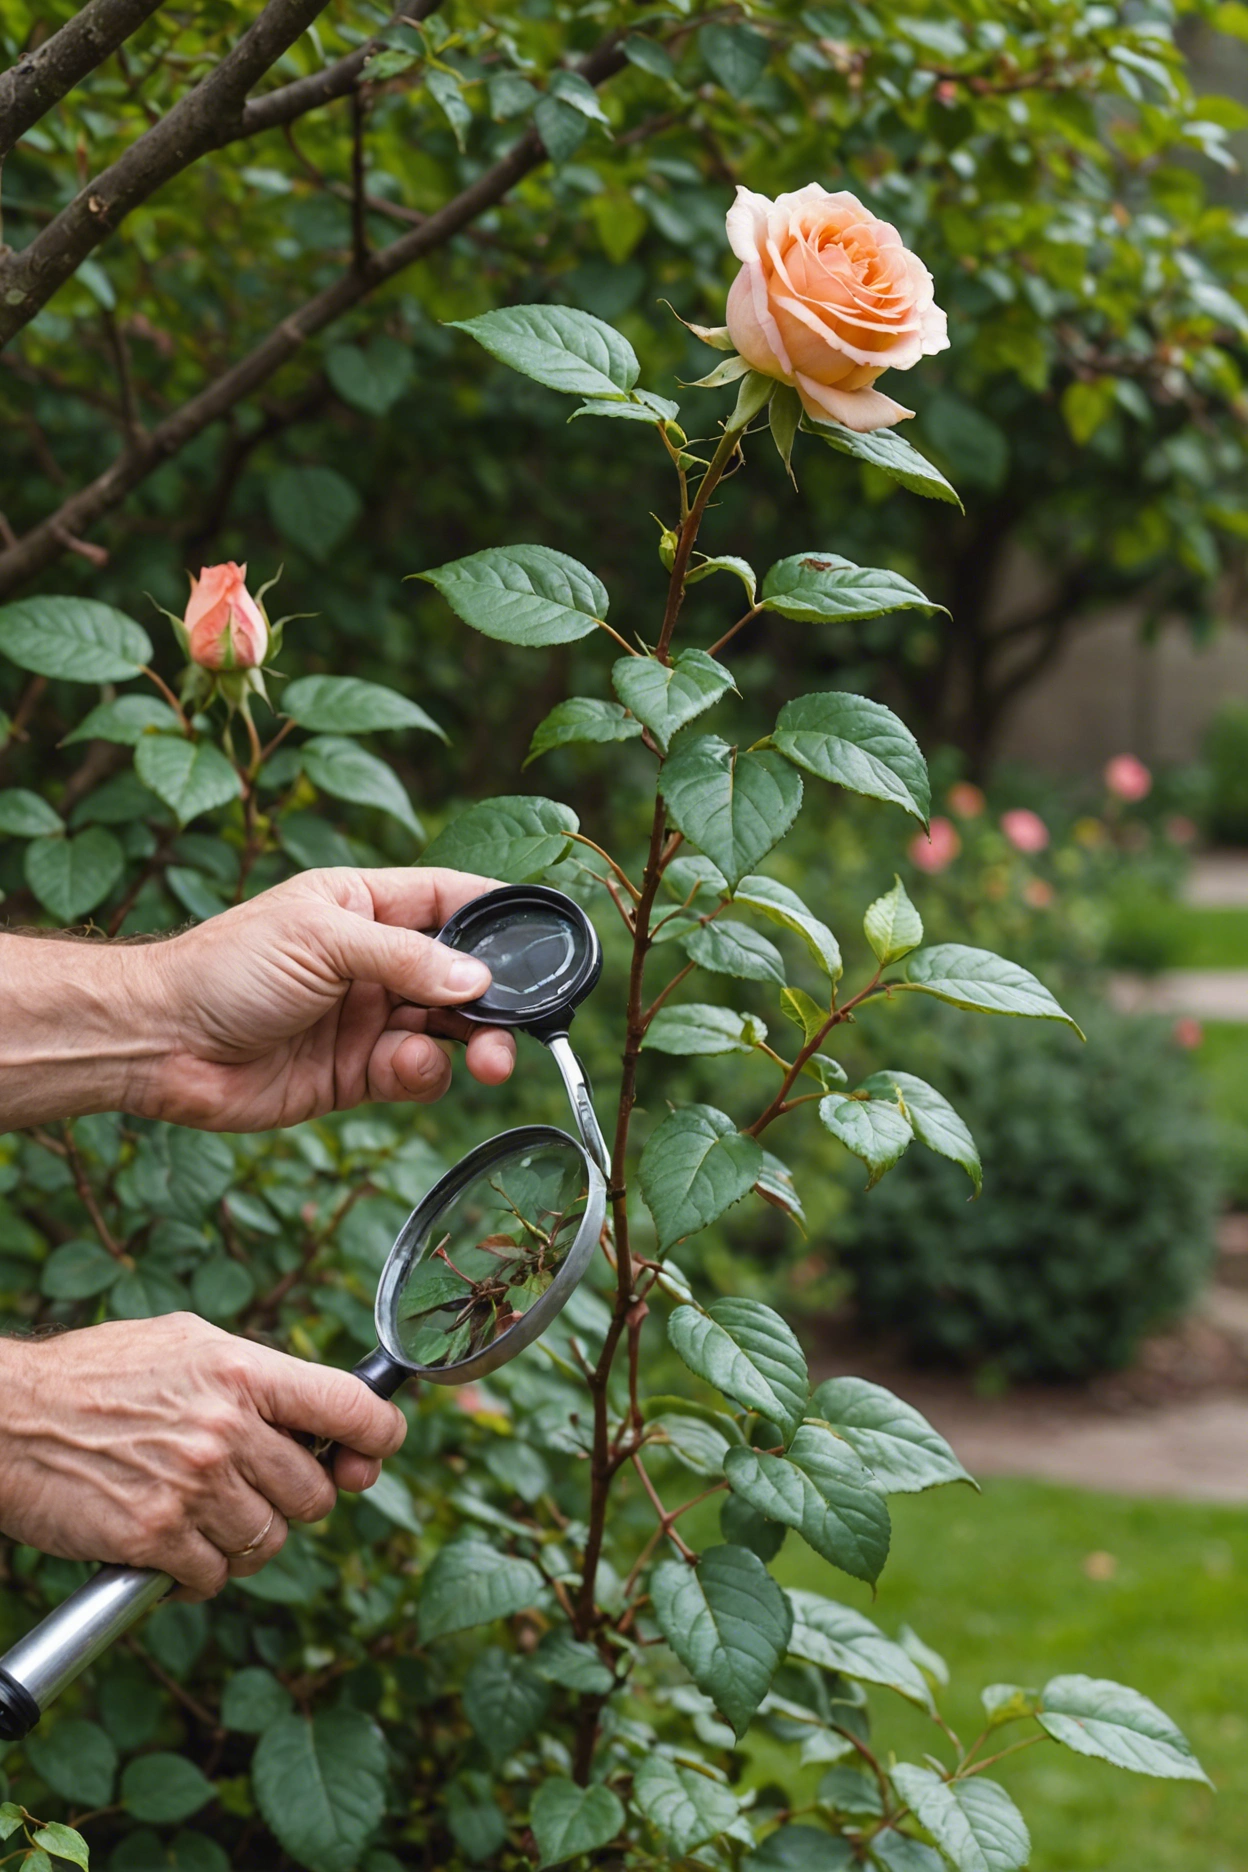 "Gardener's hand holding a magnifying glass inspecting a wilting rose bush, with nearby gardening tools."